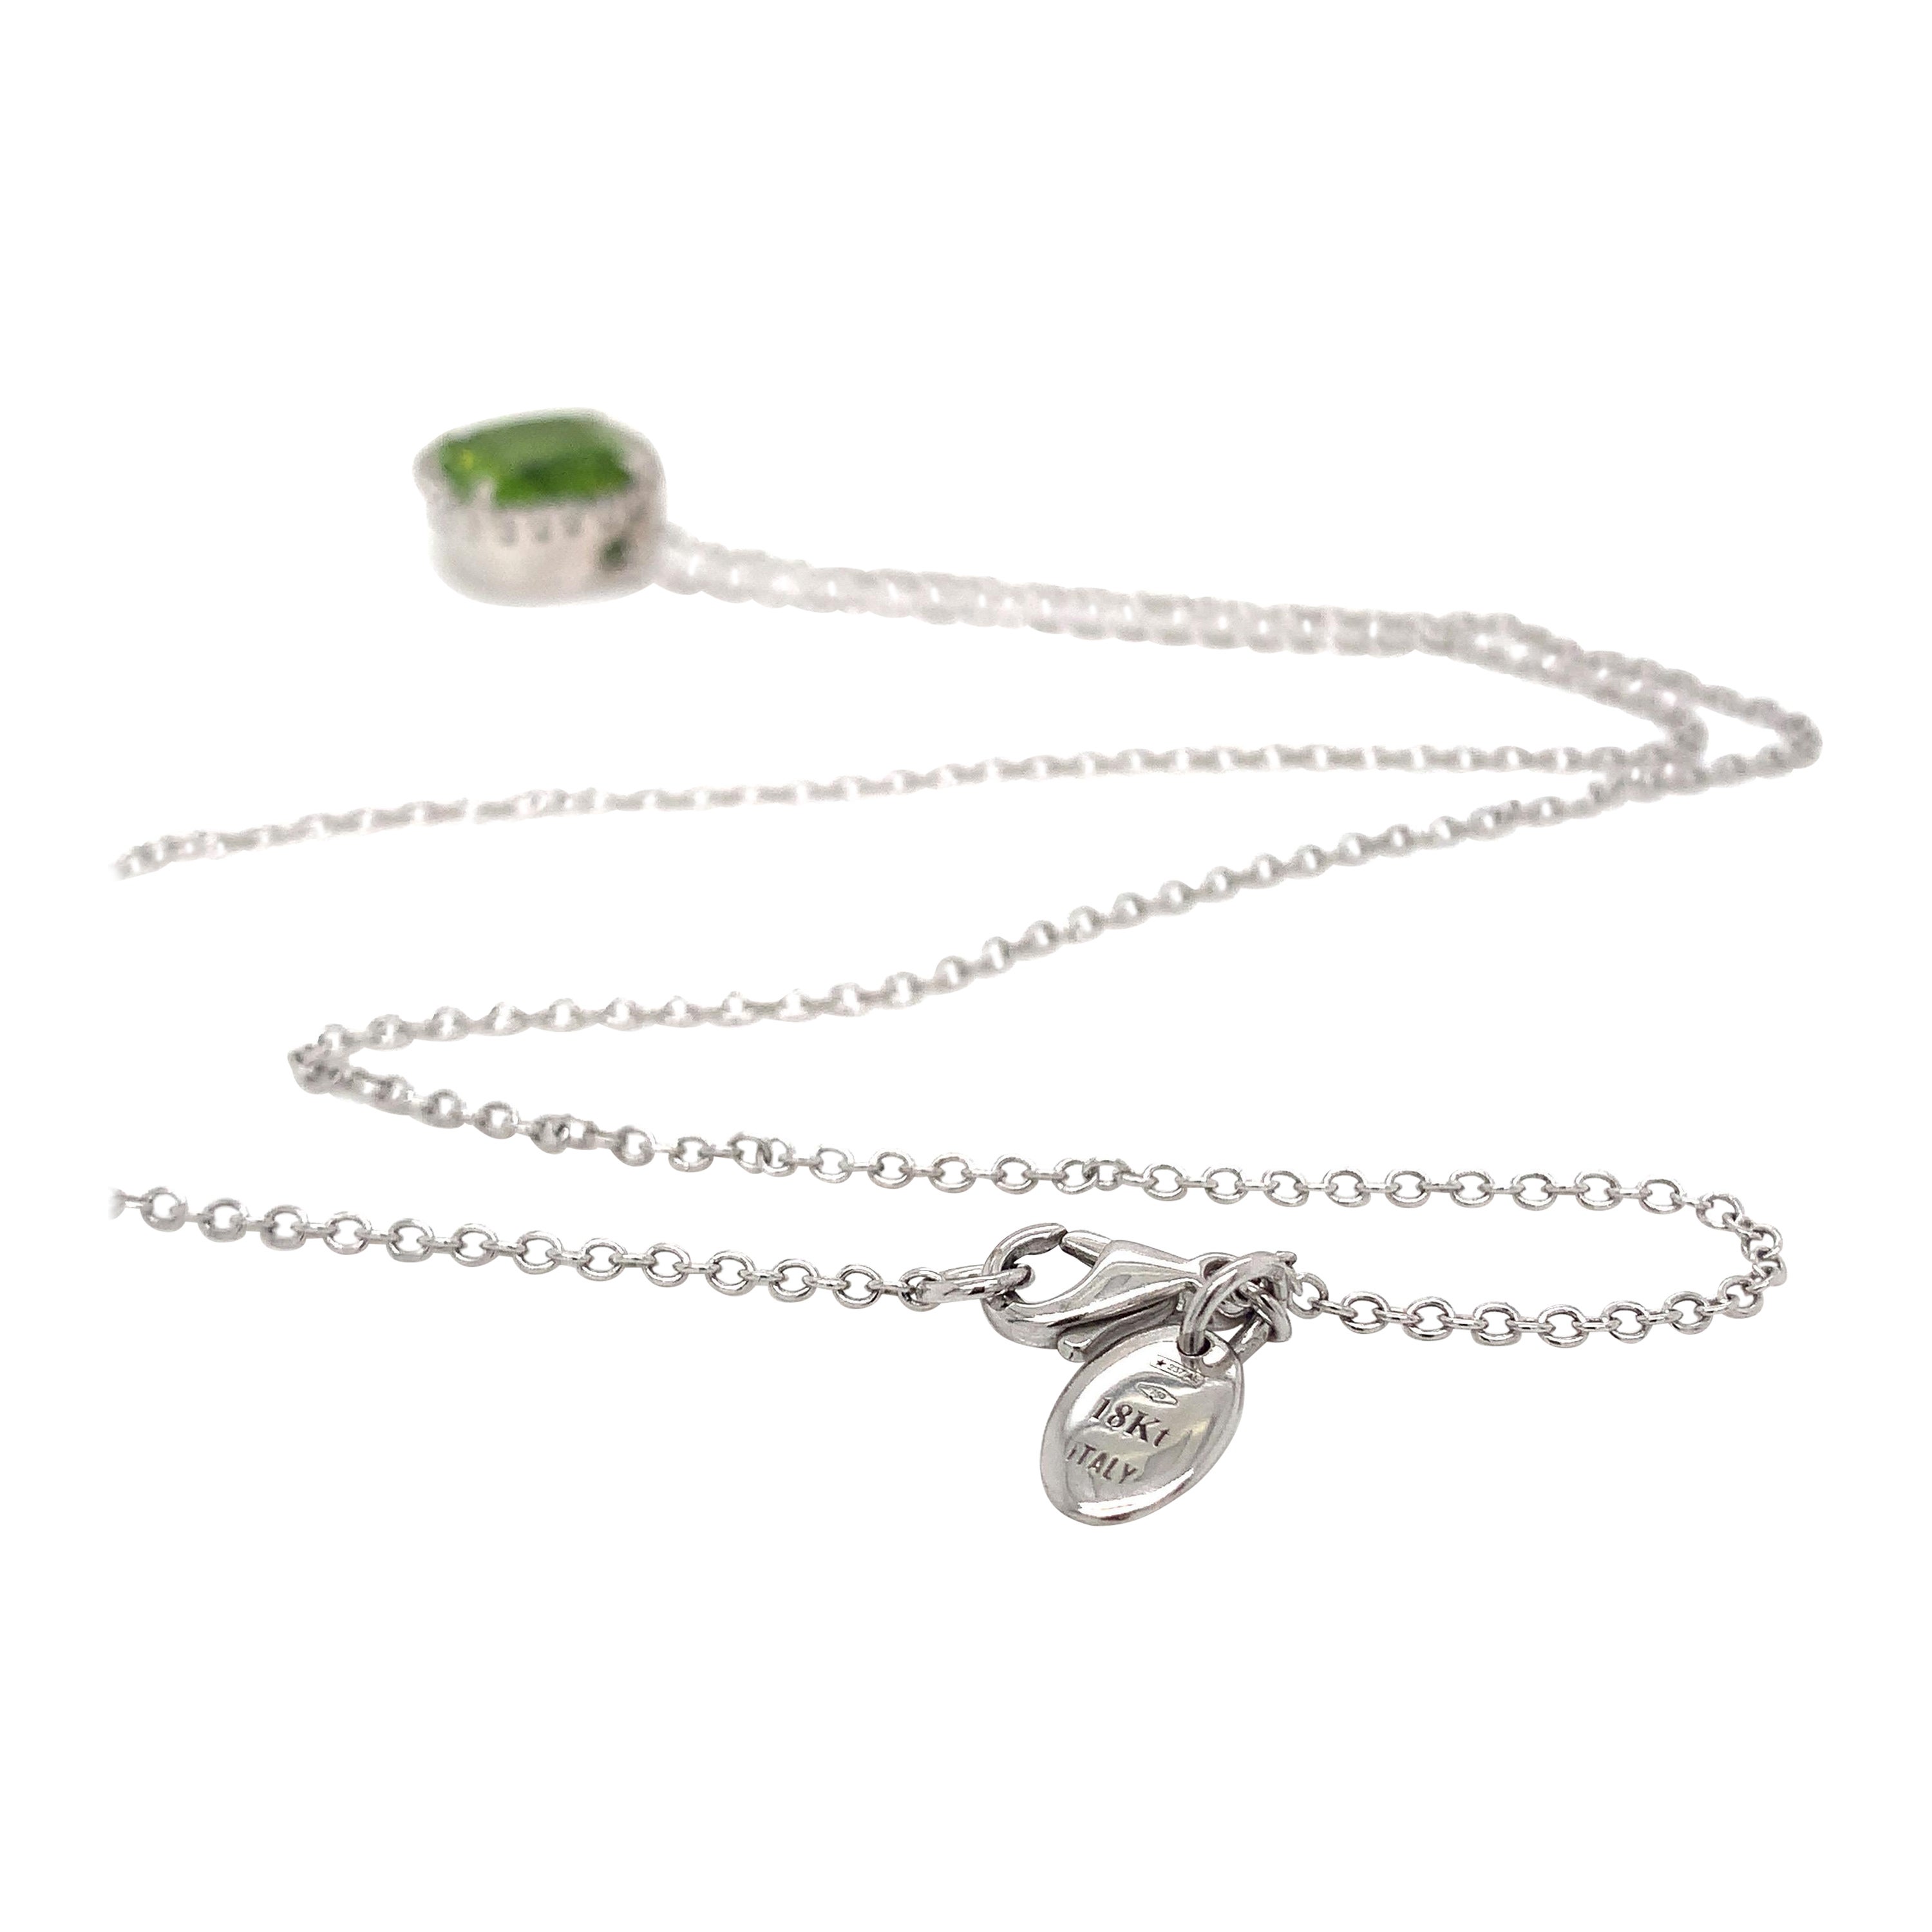 18KT White Gold Peridot and  Diamond Garavelli Pendant with Necklace 
GOLD gr : 6.4
DIAMOND ct : 0.10
Natural PERIDOT ct : 4.75
A green peridot  adorned with pave  diamonds is a dazzling combination of gemstones. The green peridot, with its vibrant